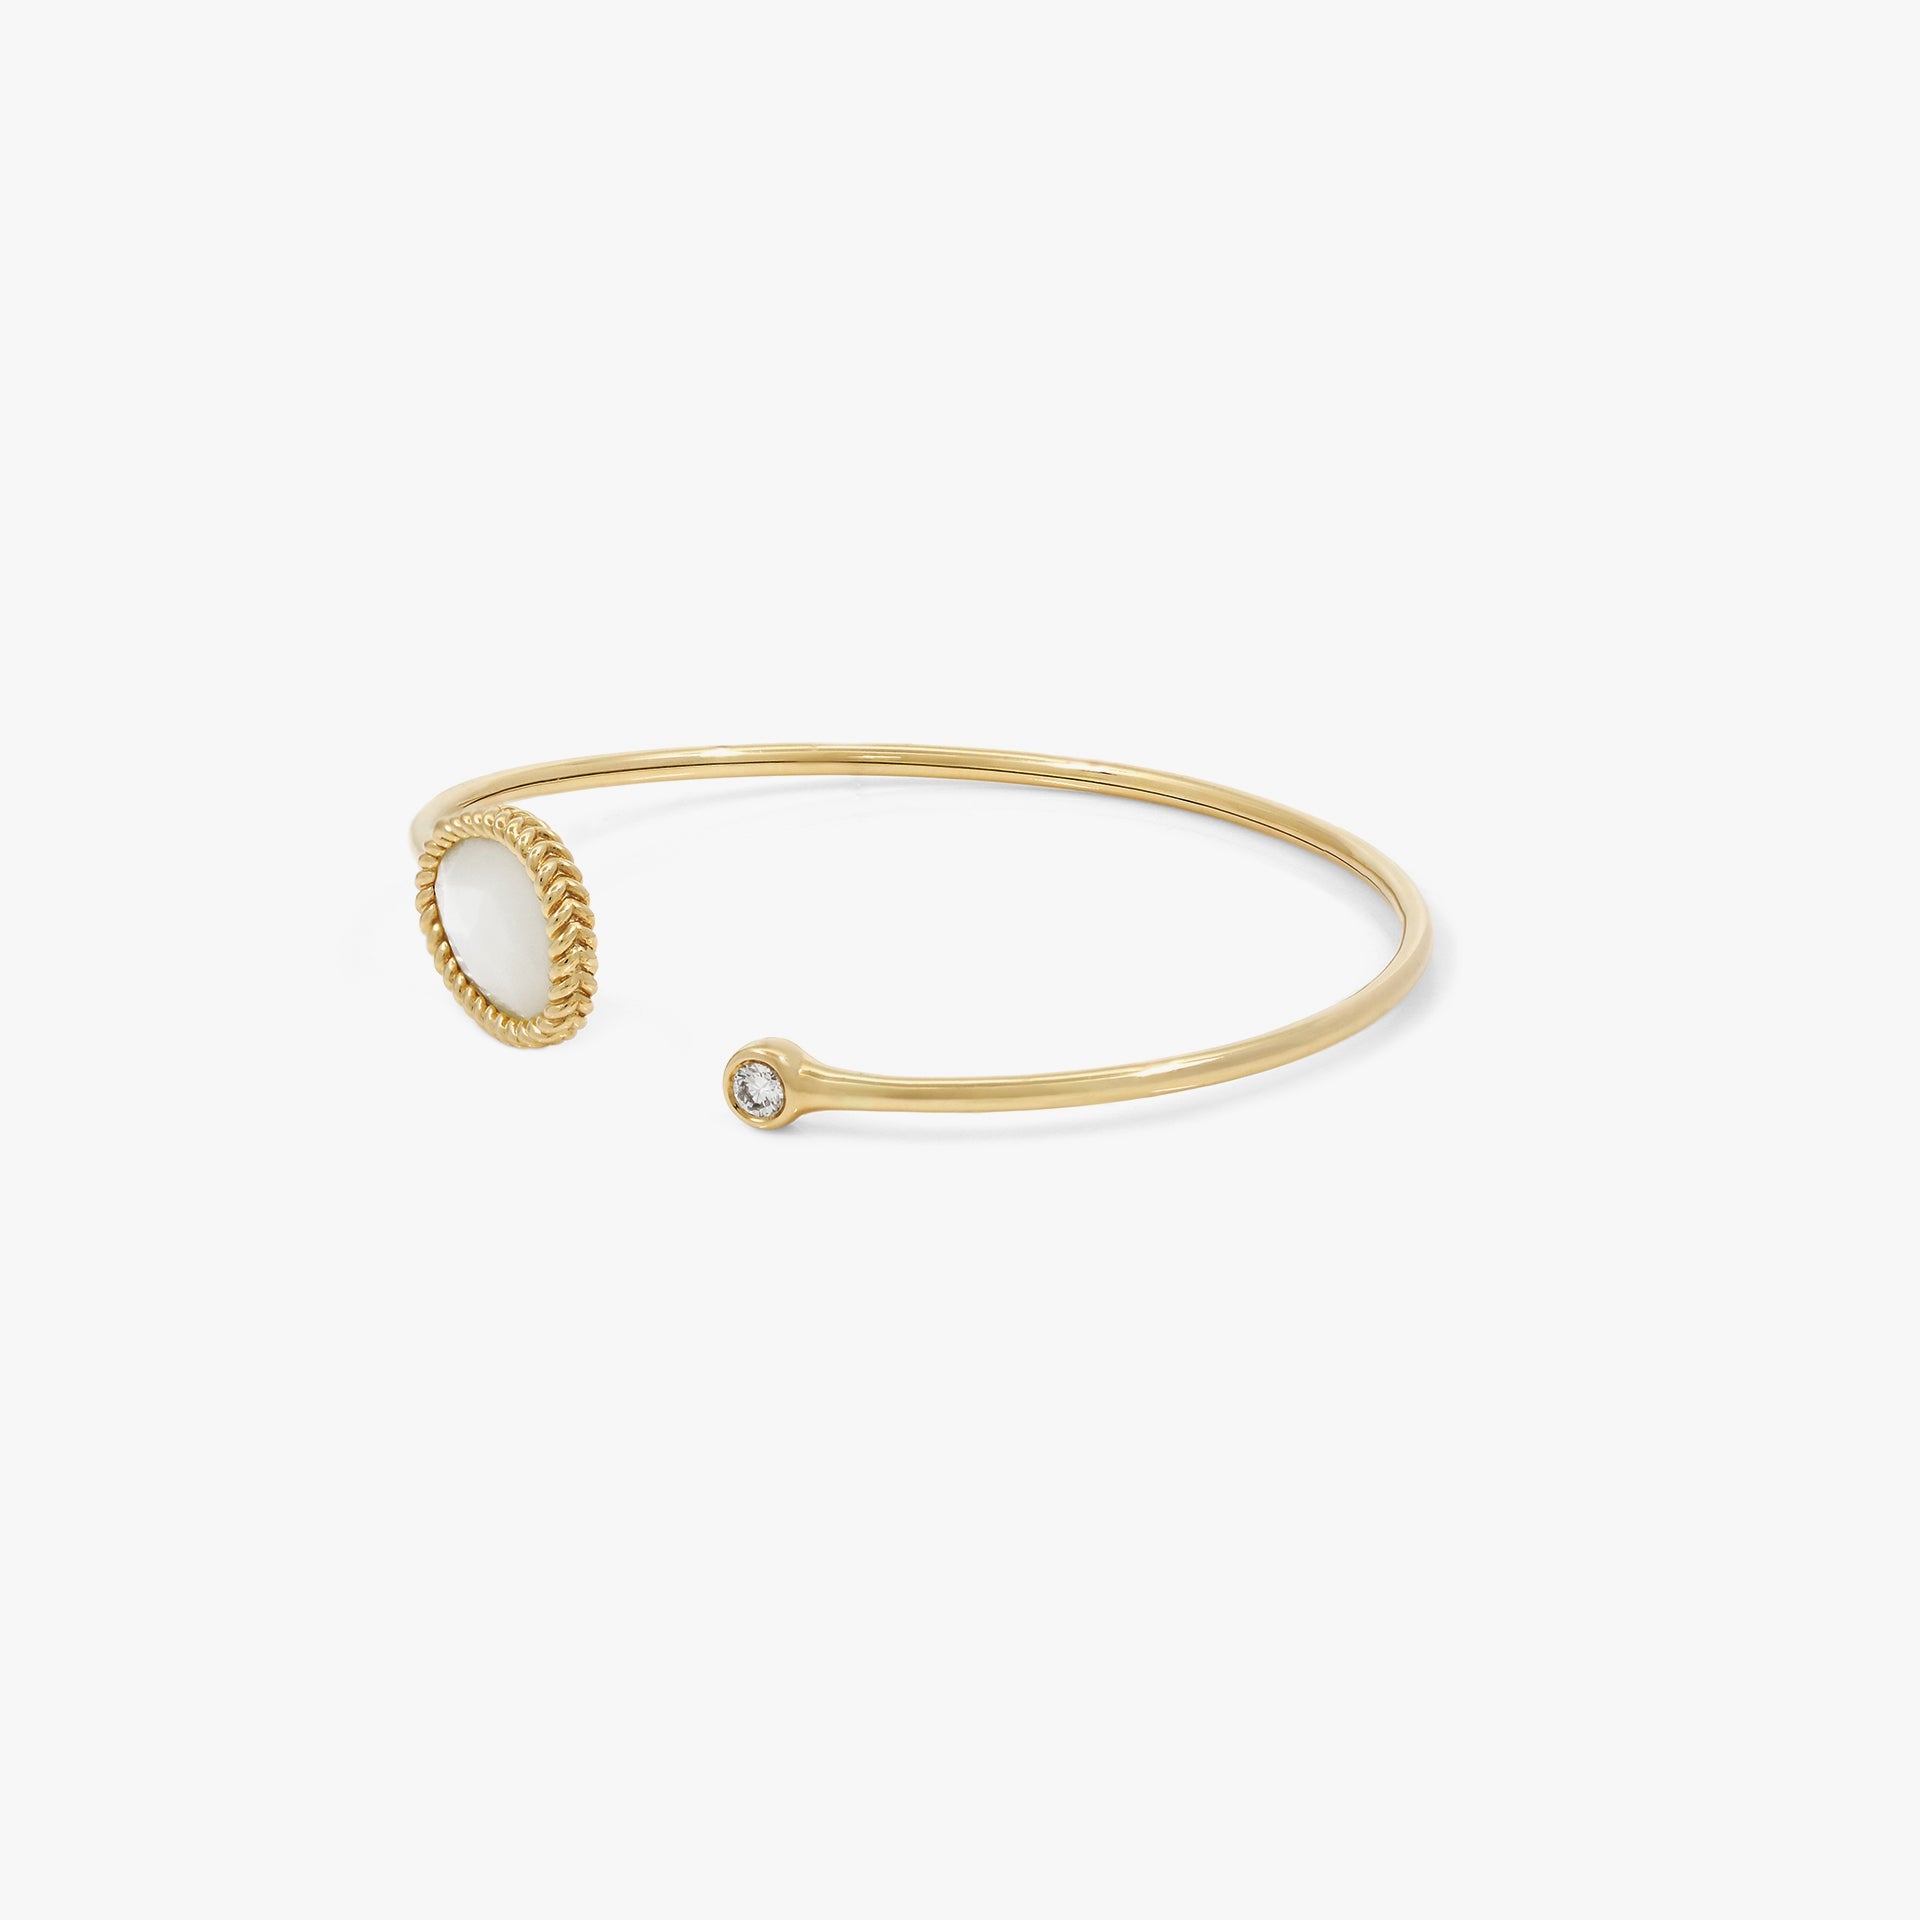 Nina Mariner Bangle In 18 Karat Yellow Gold With Natural White Diamond And Mother Of Pearl Stone